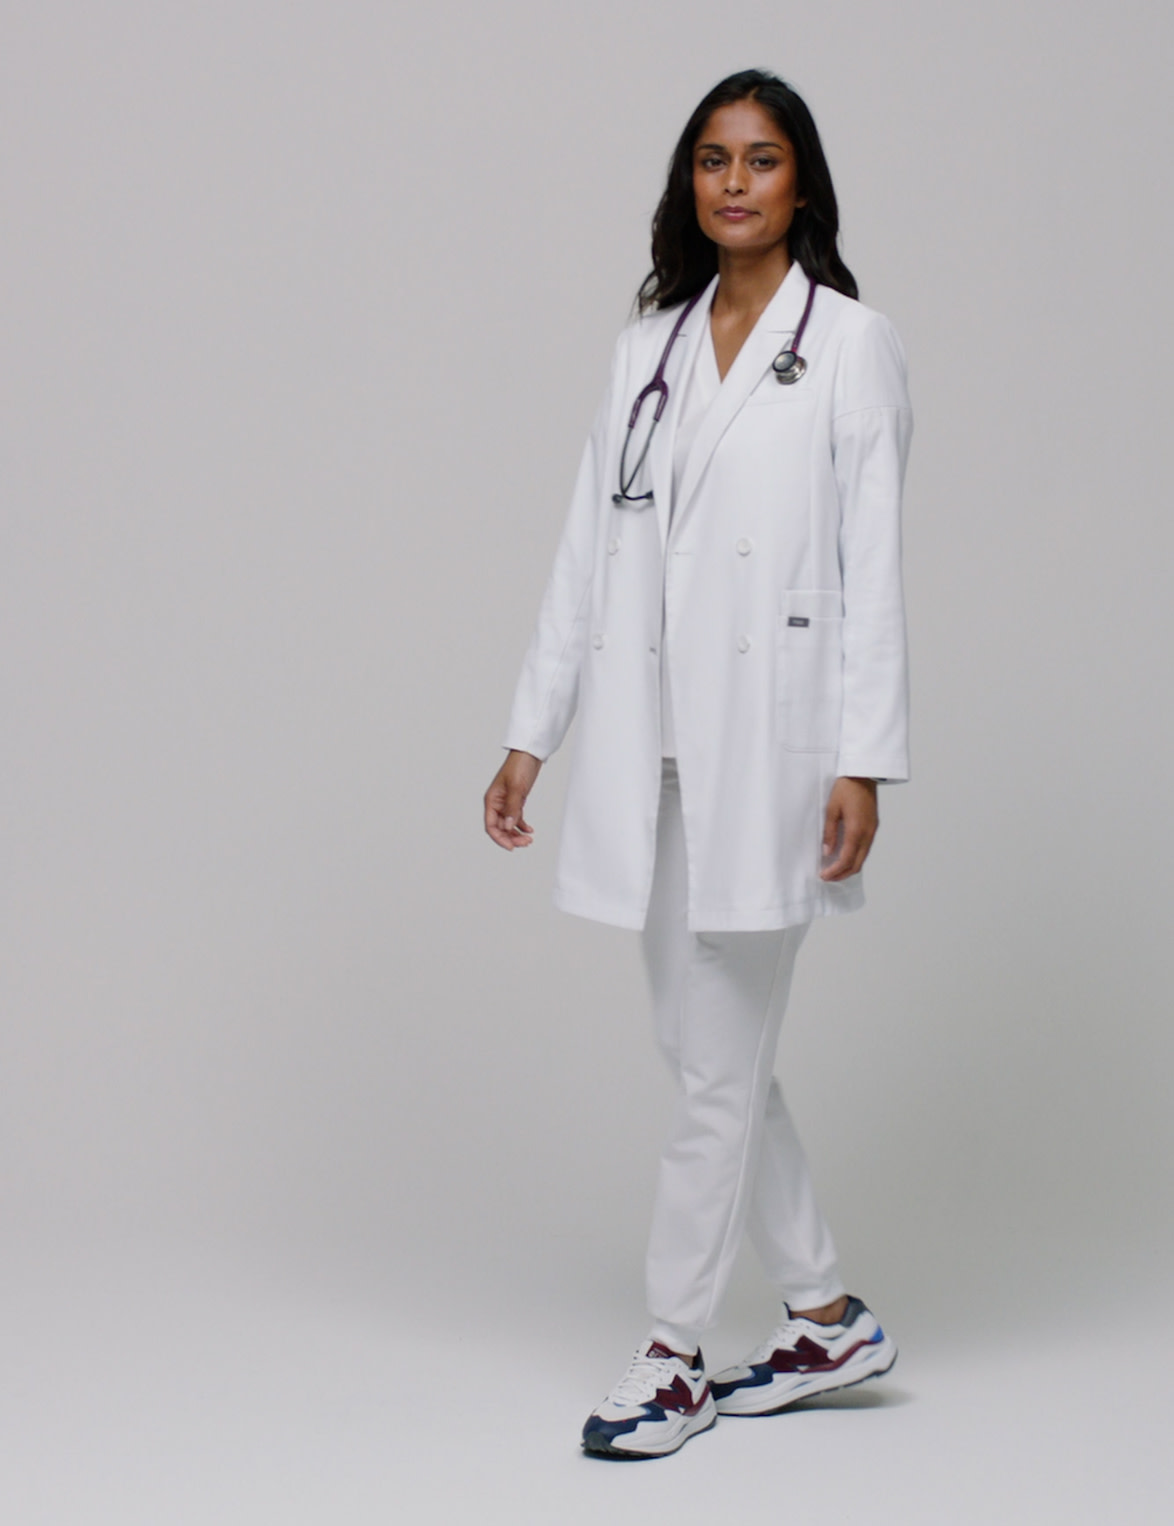 NEW — The Double Breasted Lab Coat features 10 pockets, a double breasted front closure and hidden rib cuffs for easy sleeve adjustments.